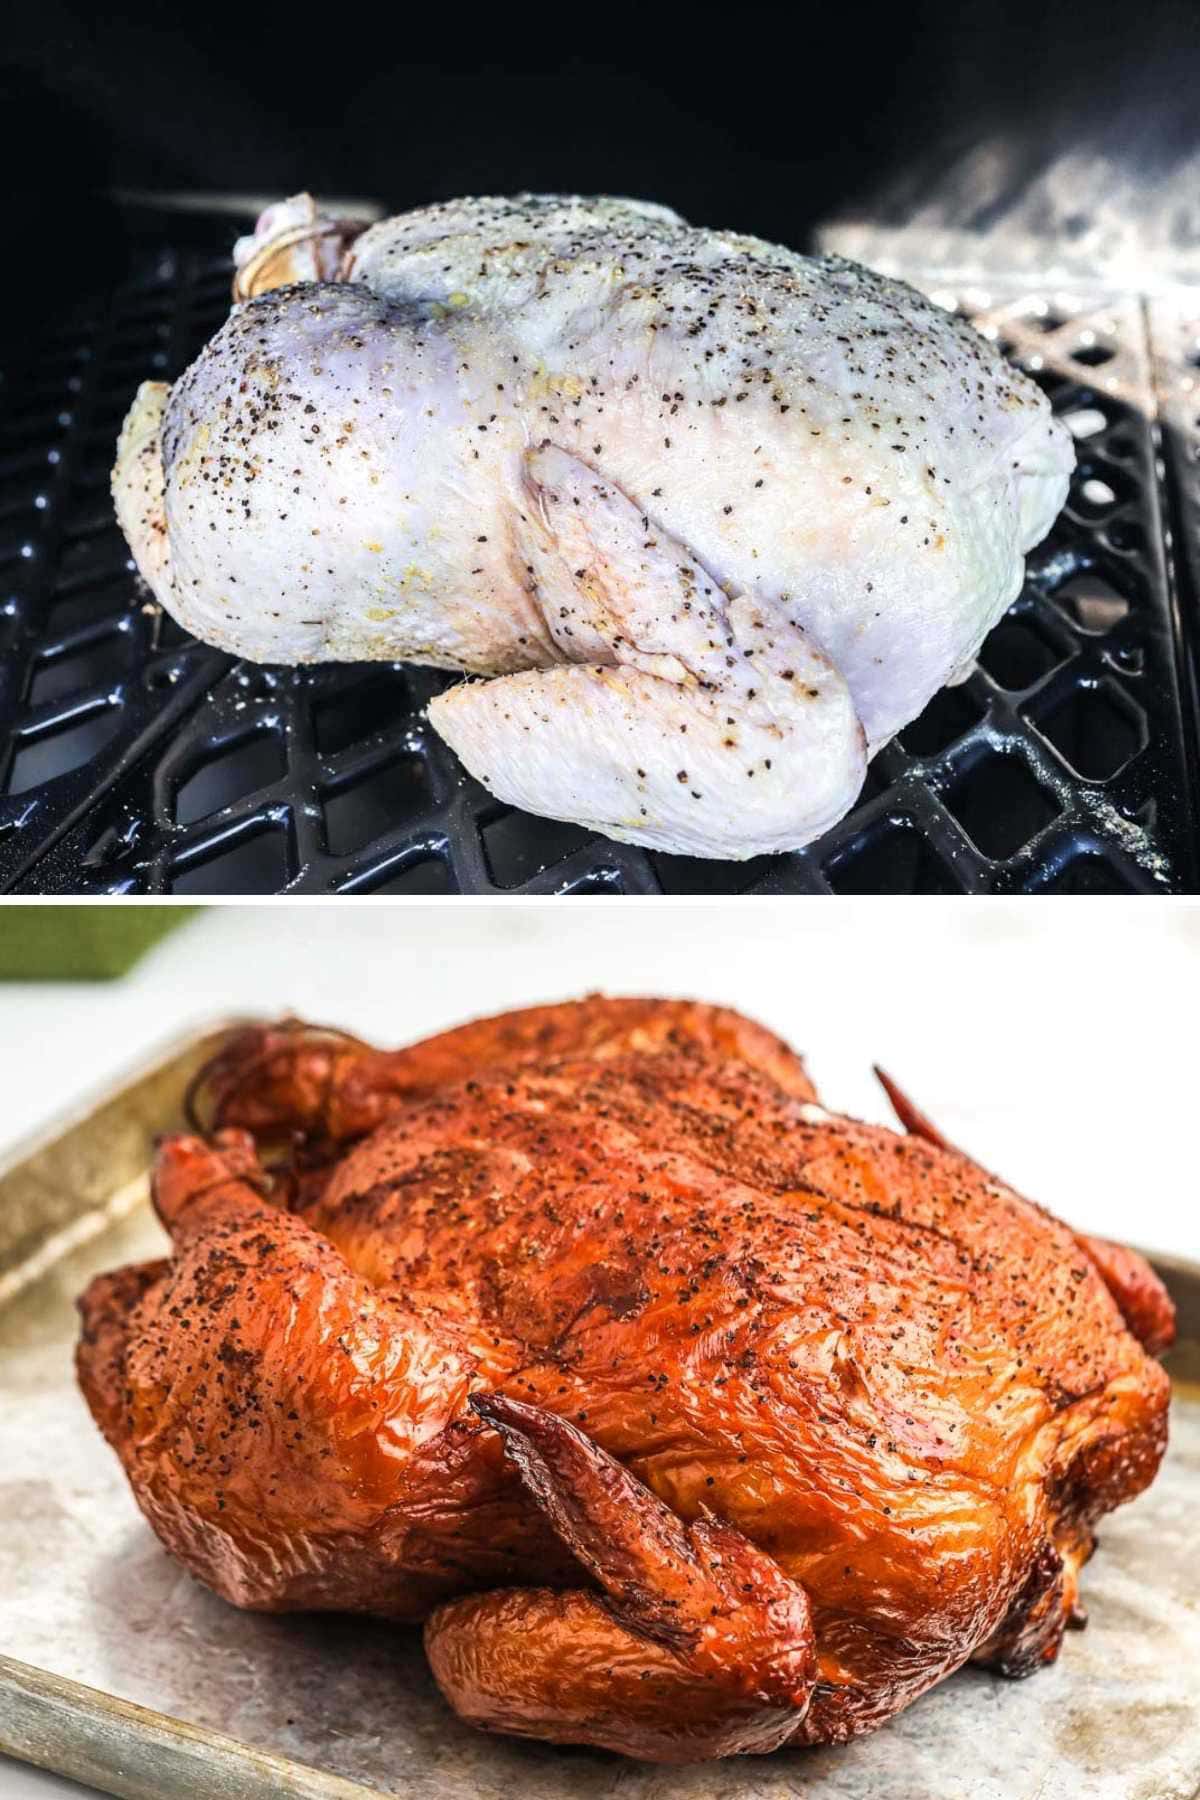 A collage with 2 images, one of a raw seasoned whole chicken placed on a smoker, and the second picture is of a whole smoked chicken on a sheet pan.